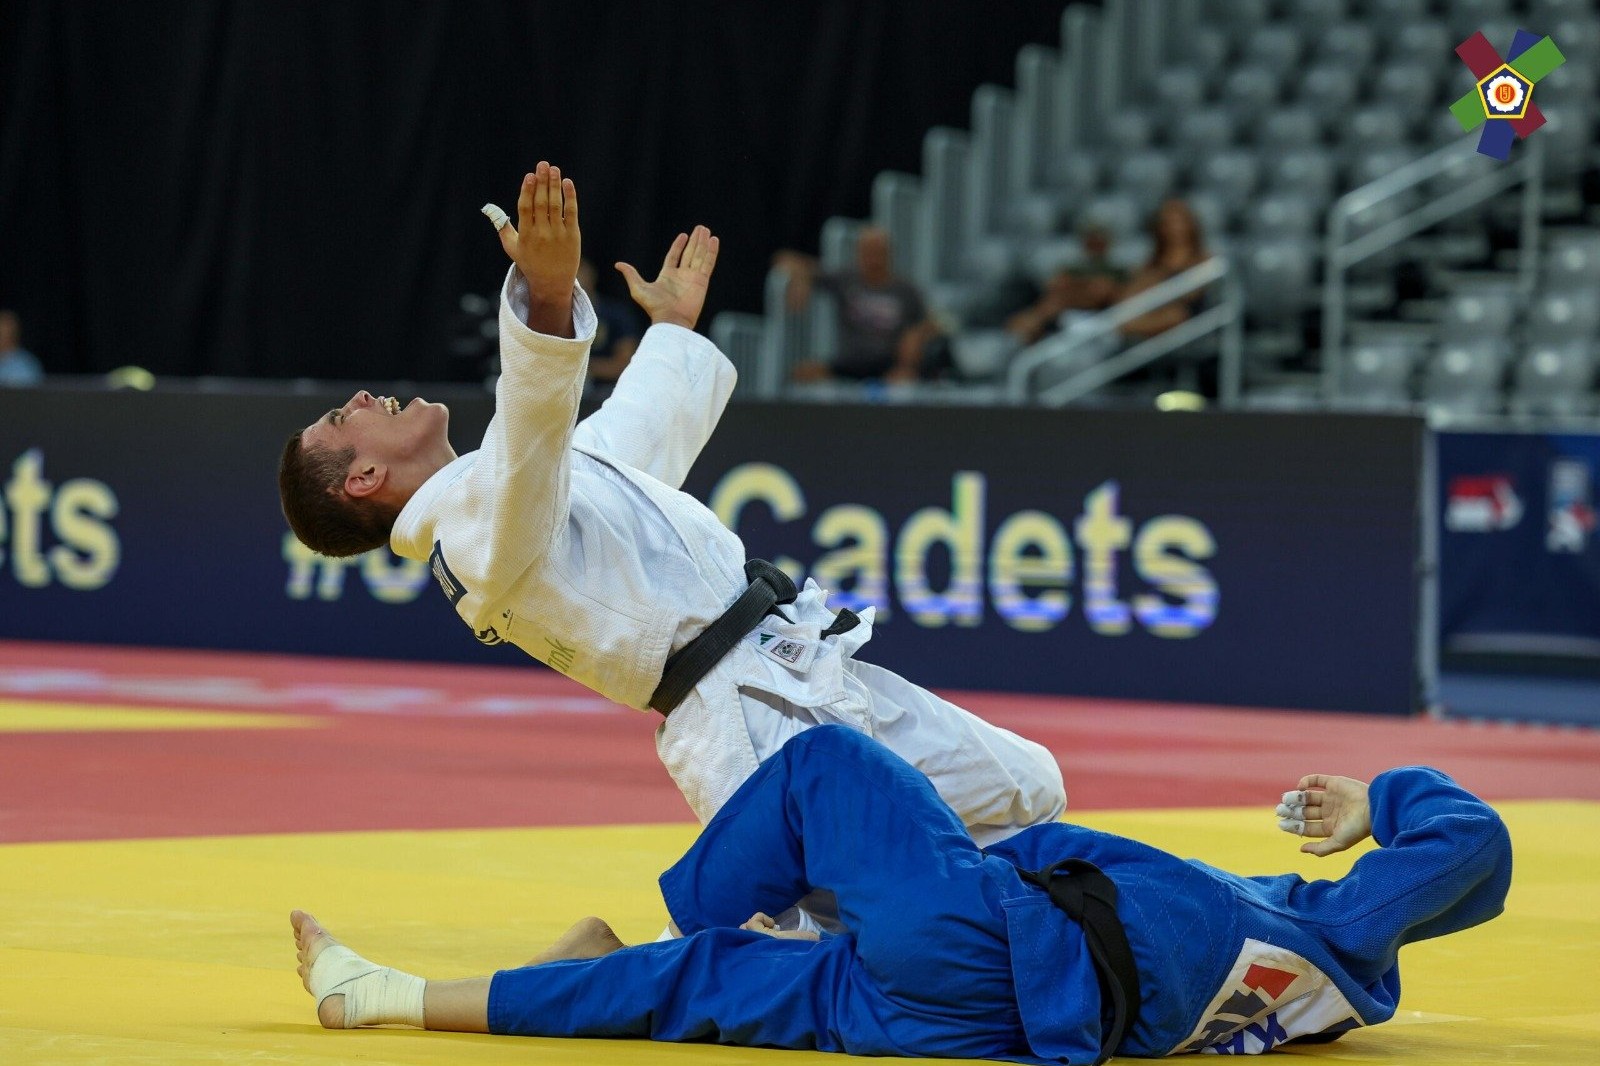 International Judo Federation: “It won’t be easy for anyone anymore, because Azerbaijan is coming!”